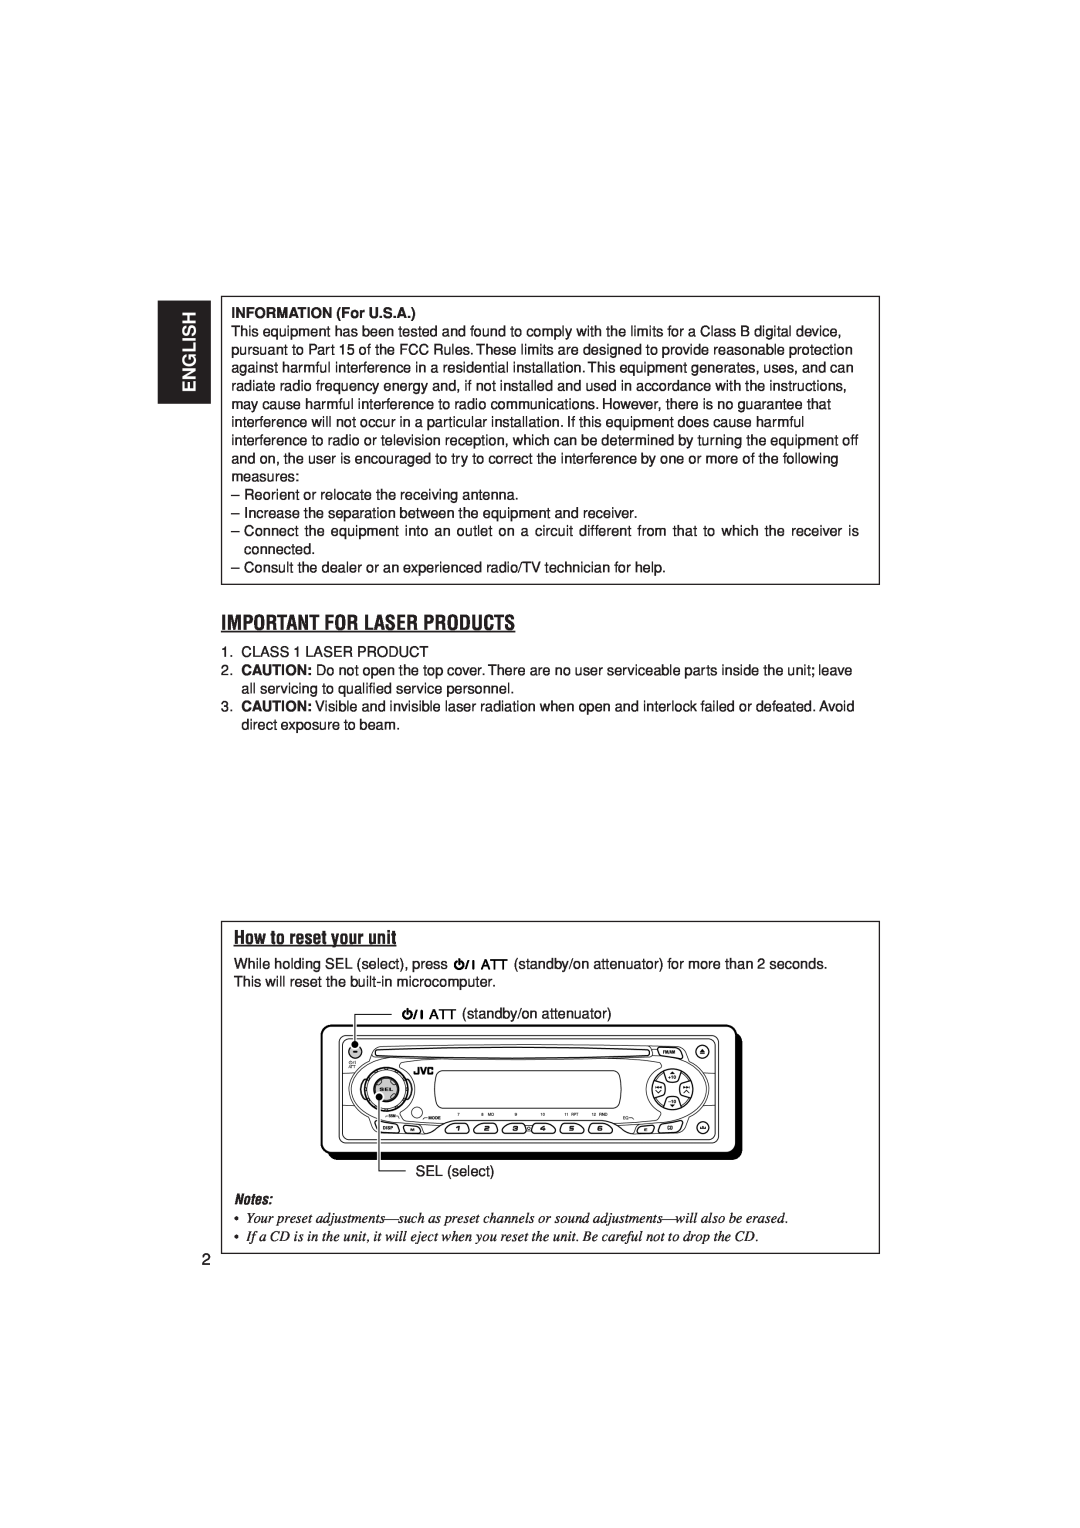 JVC KD-S20 manual Important For Laser Products, English, How to reset your unit, INFORMATION For U.S.A 